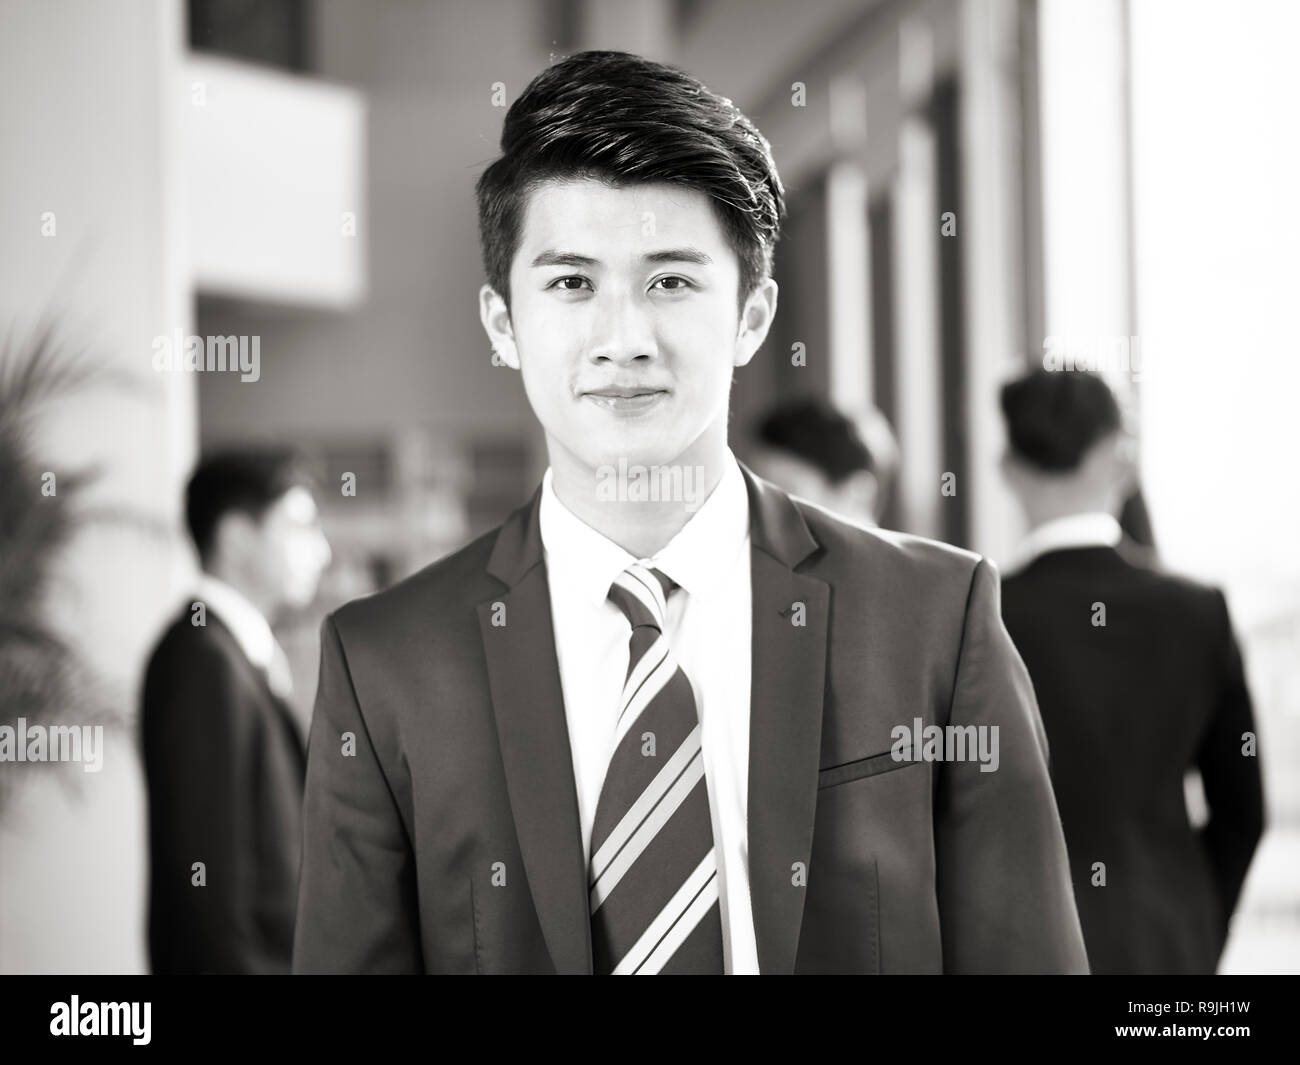 portrait of a young asian business man, pointing and looking at camera smiling, colleagues chatting in background, black and white. Stock Photo